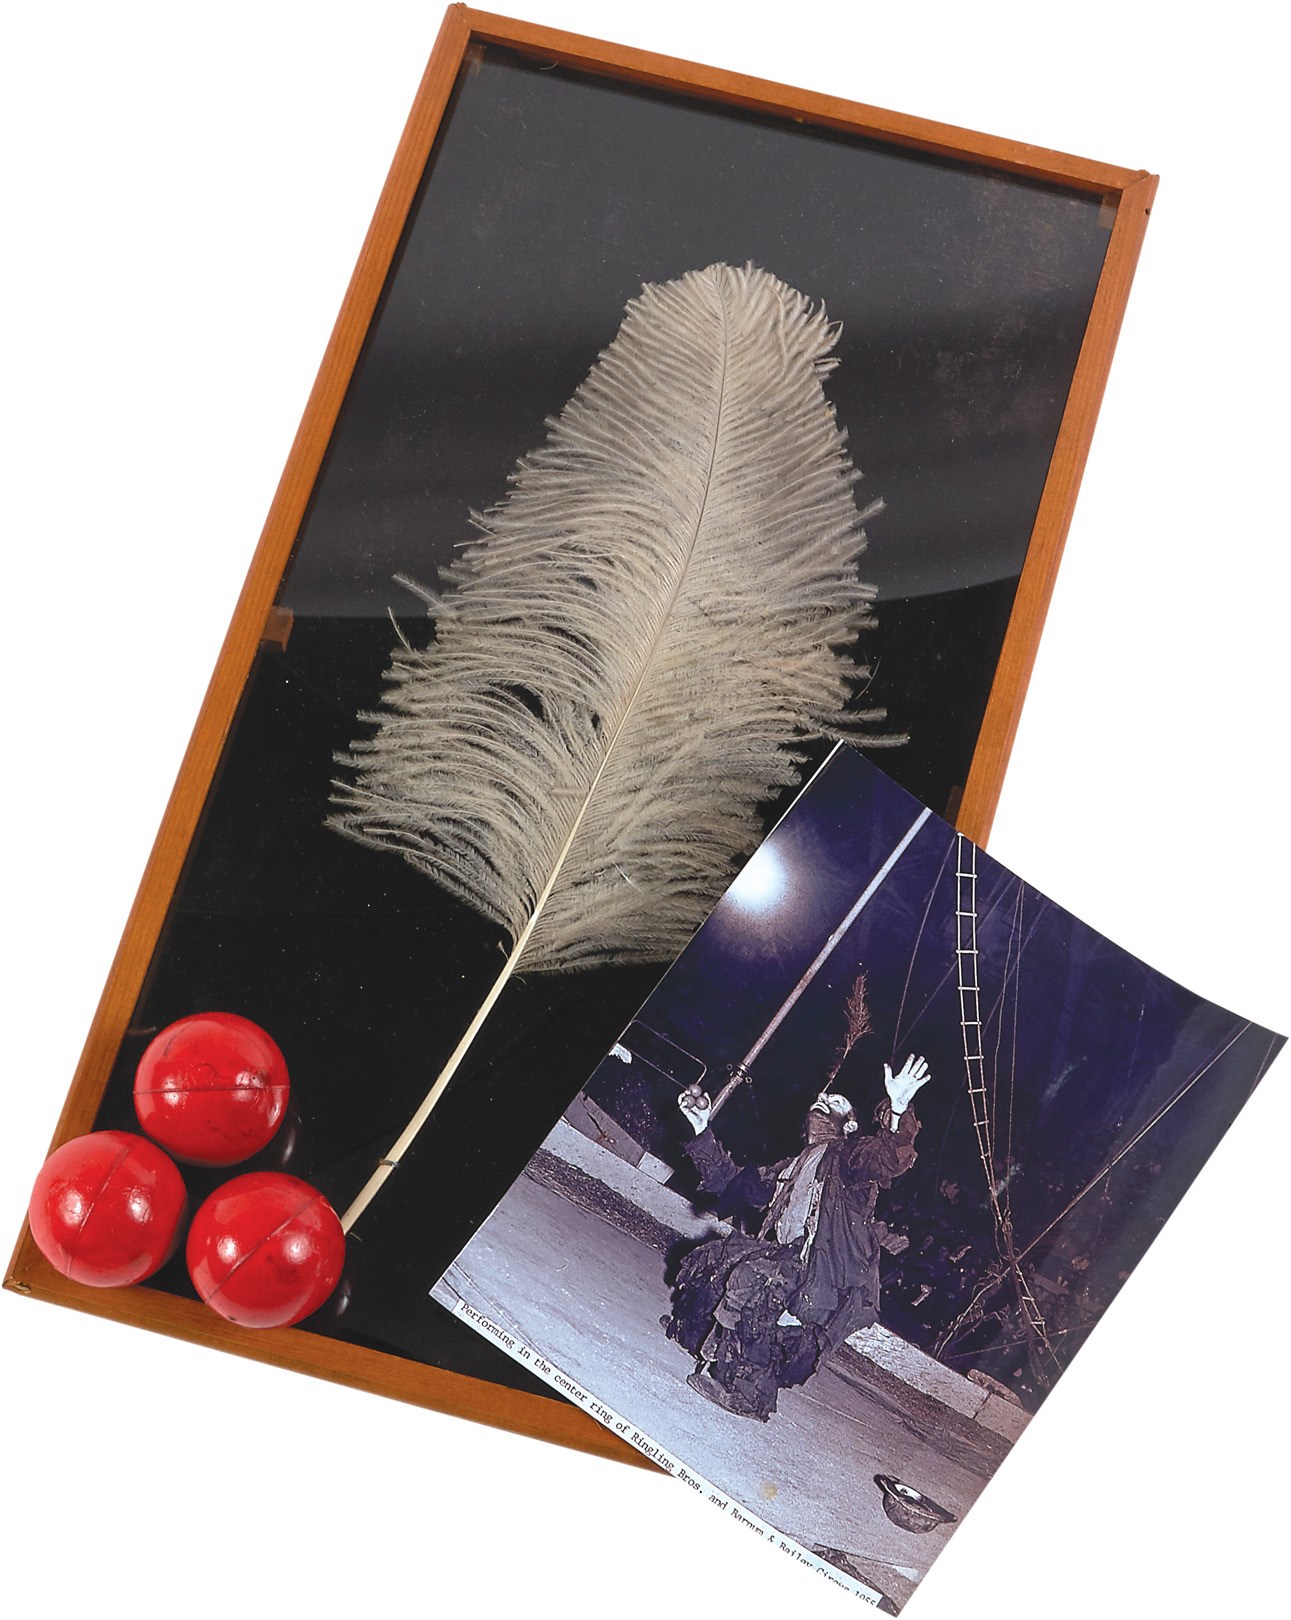 The Emmett Kelly Collection - The Feather & Juggling Balls from Emmett Kelly's "Feather Act"